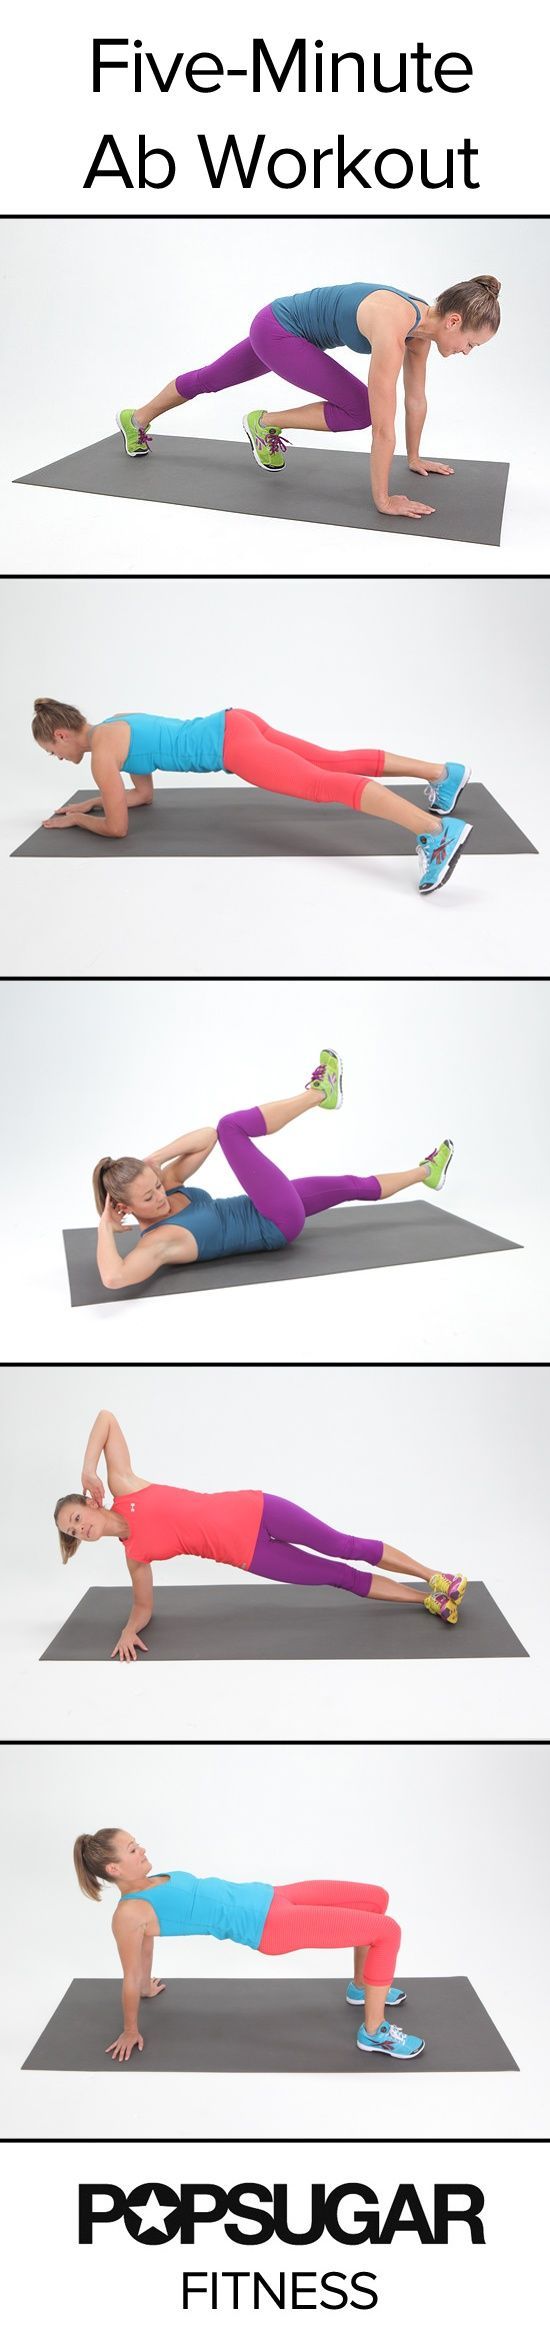 Five-Minute Ab Workout: This five-minute ab workout will help you get a stronger